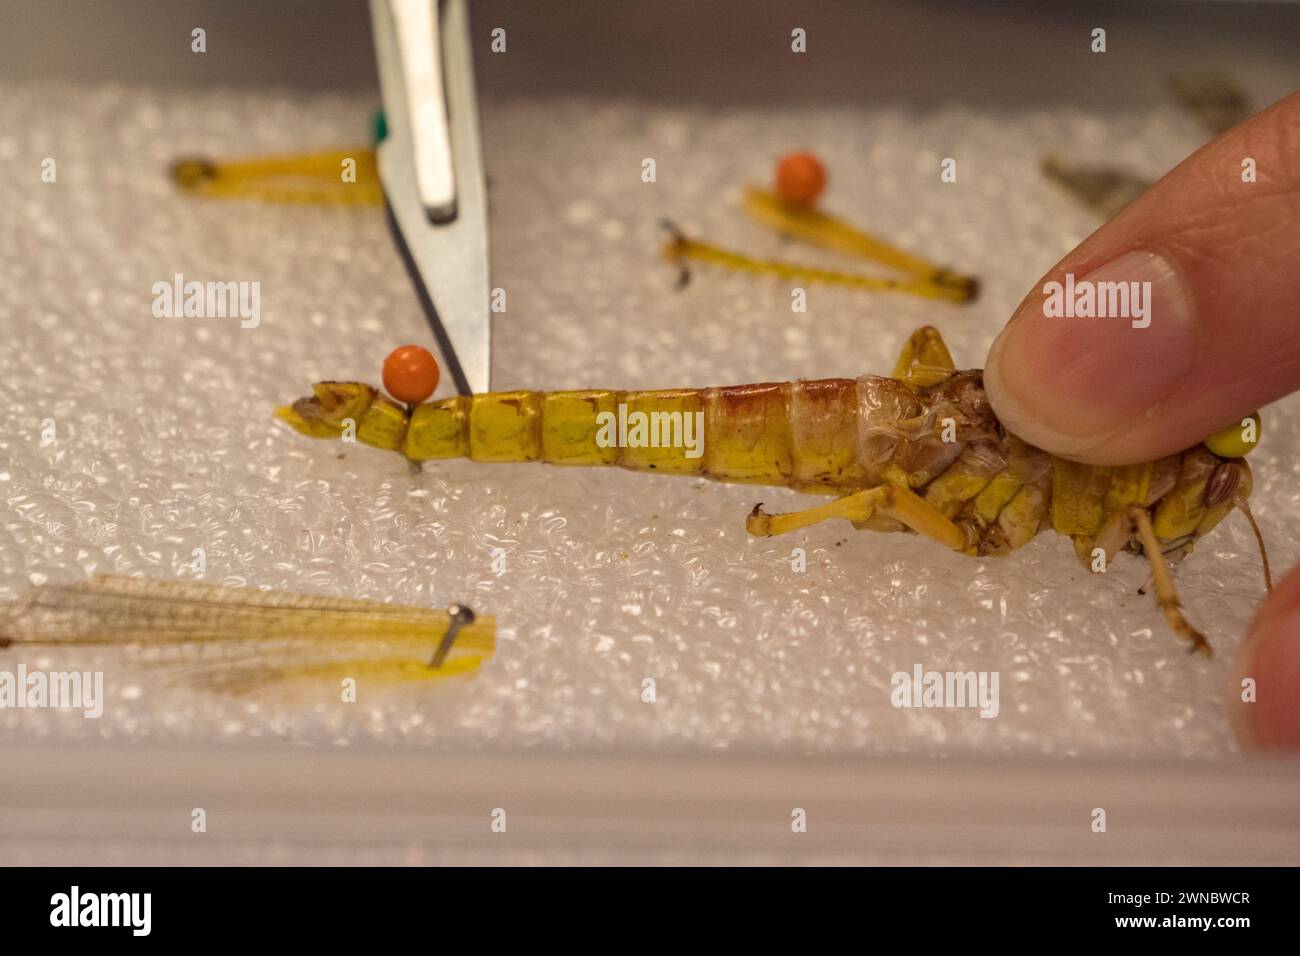 Making an incision with a scalpel on a desert locust (Schistocerca gregaria) mid dissection (examining gas exchange system) in a UK Secondary School. Stock Photo